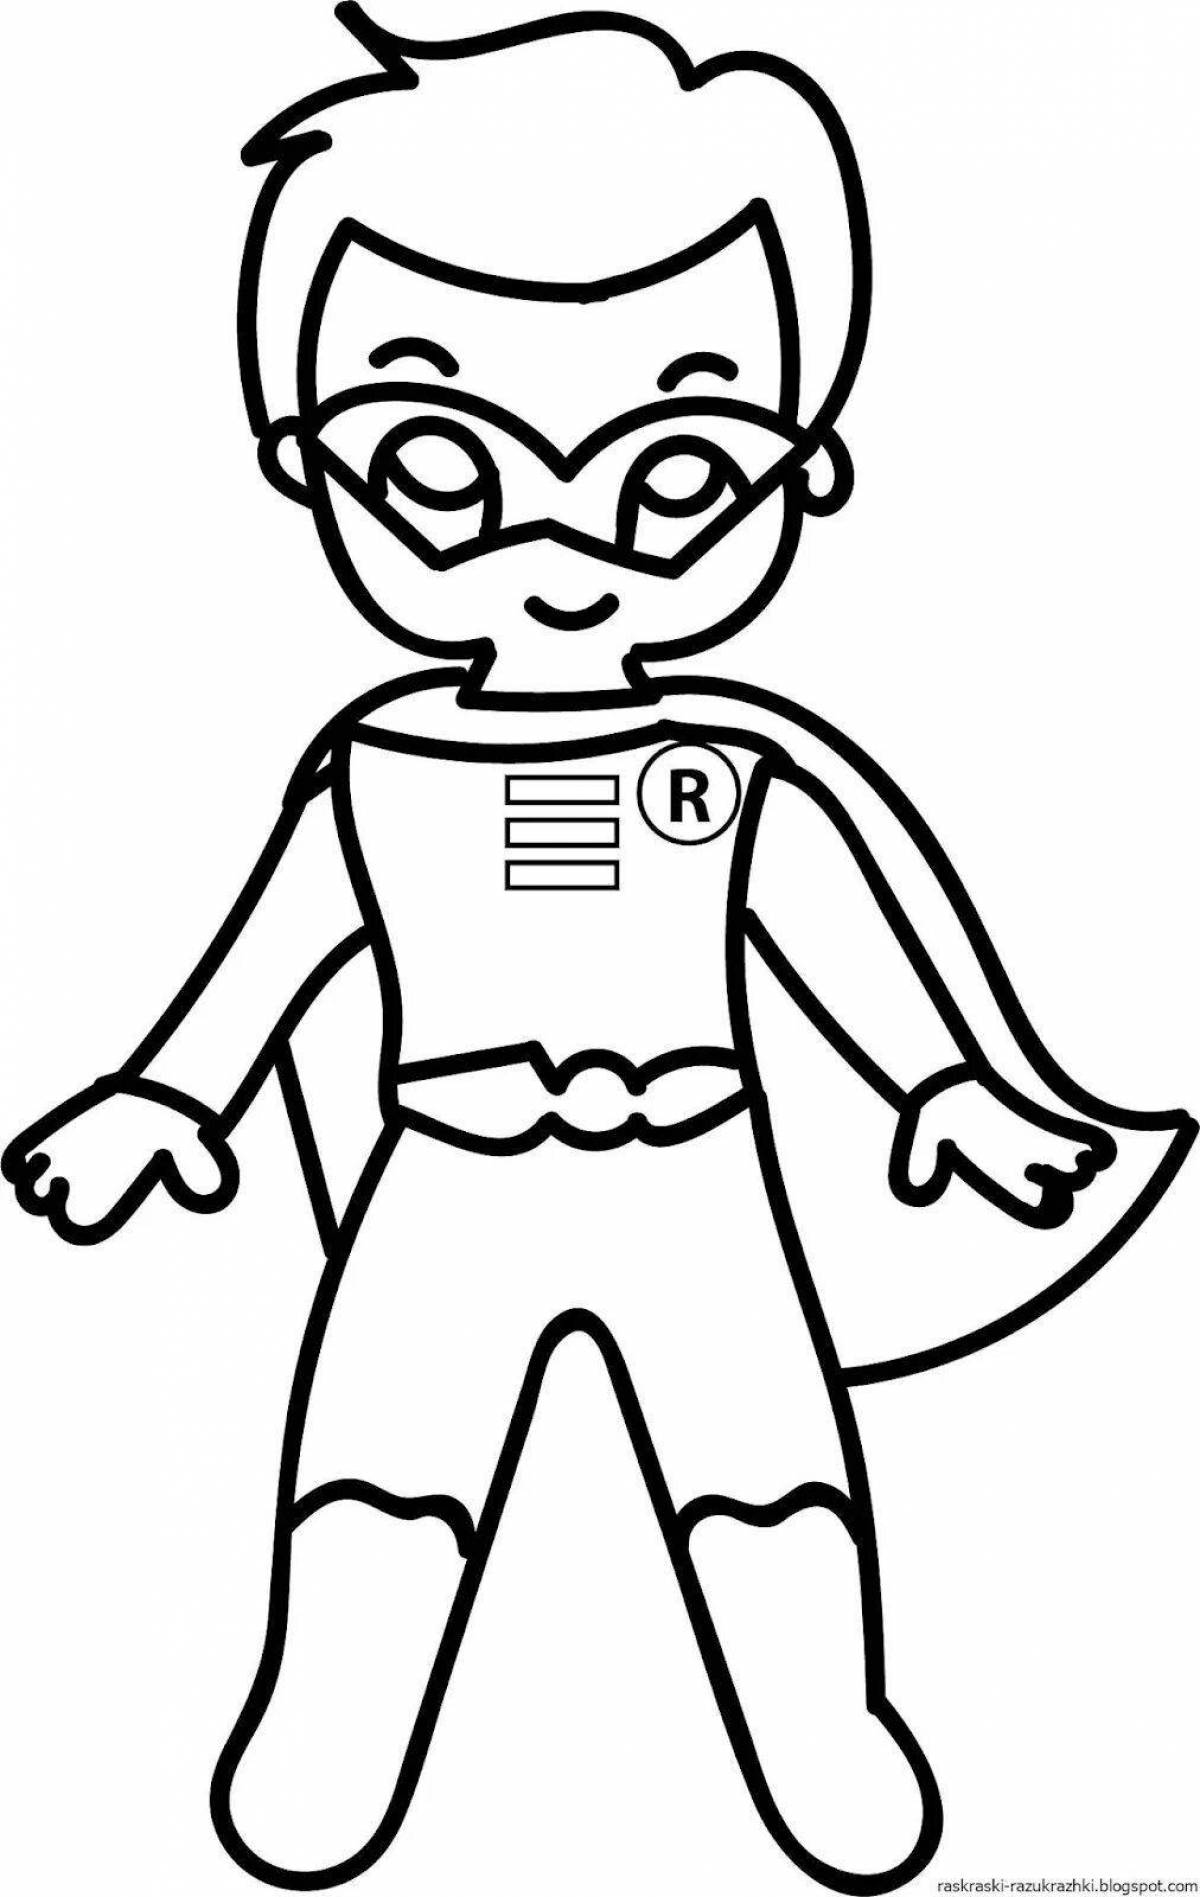 Coloring book funny superheroes for children 5-6 years old